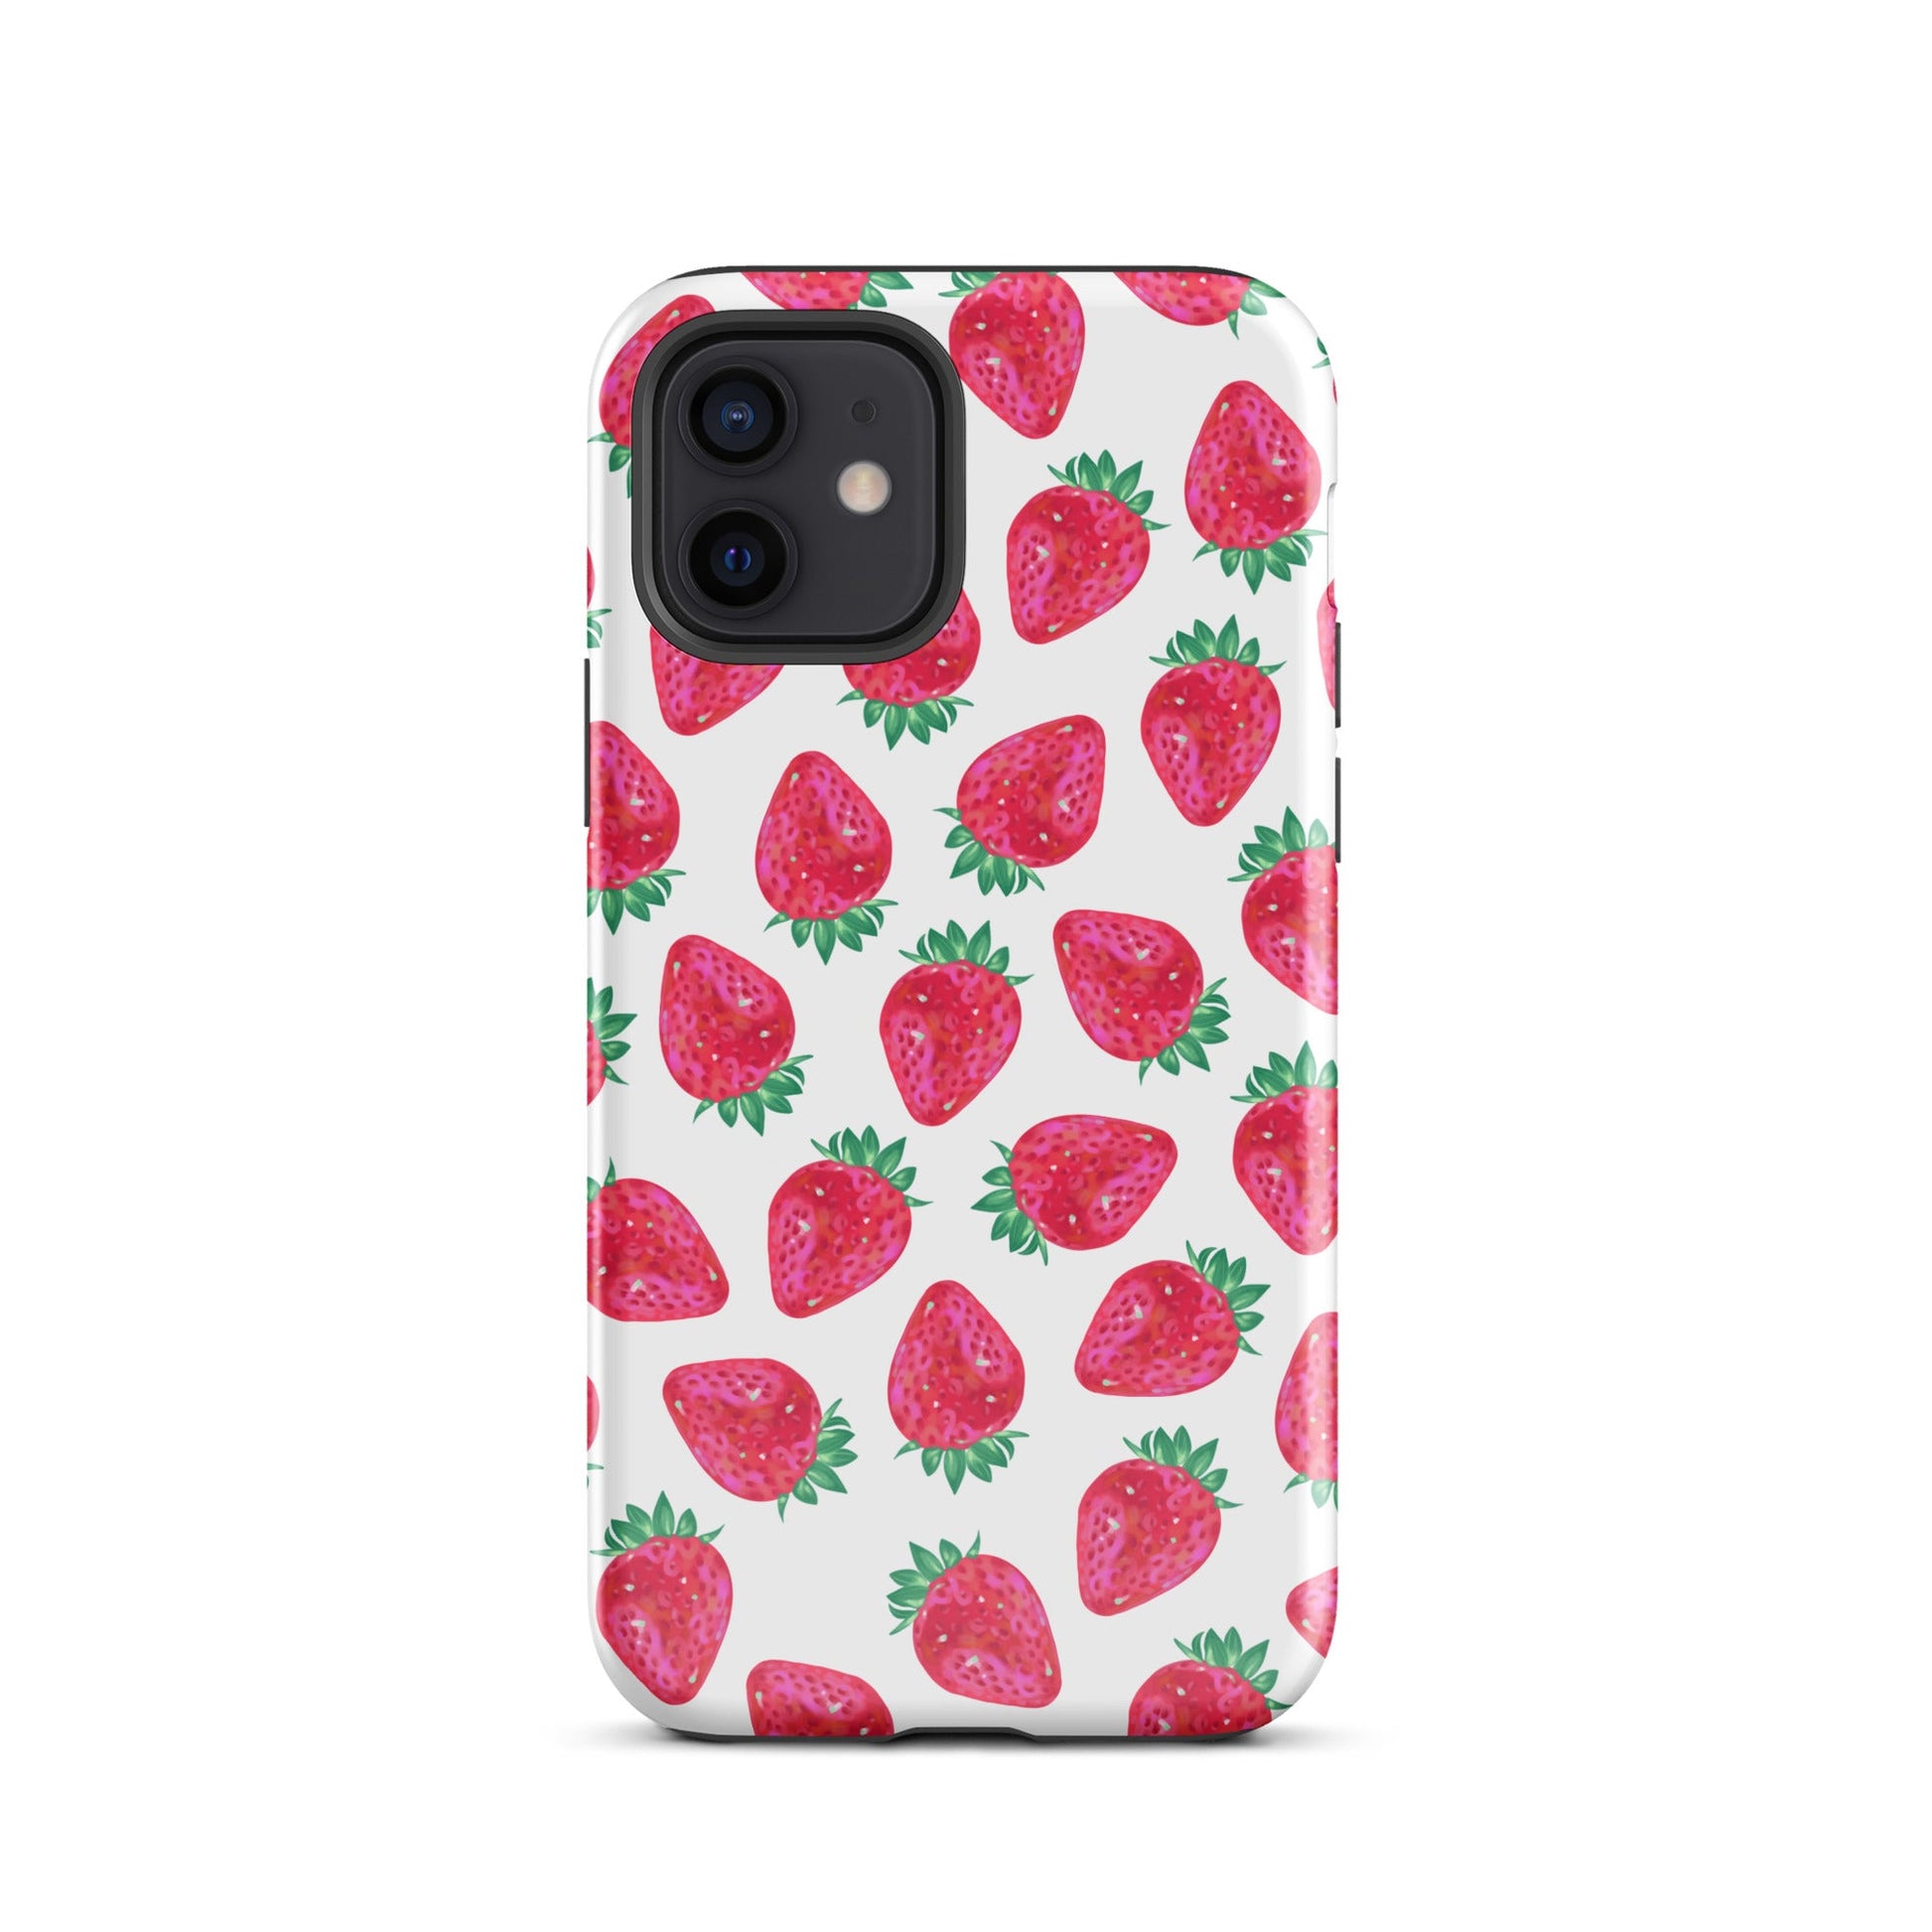 Strawberry iPhone Case - blunt cases